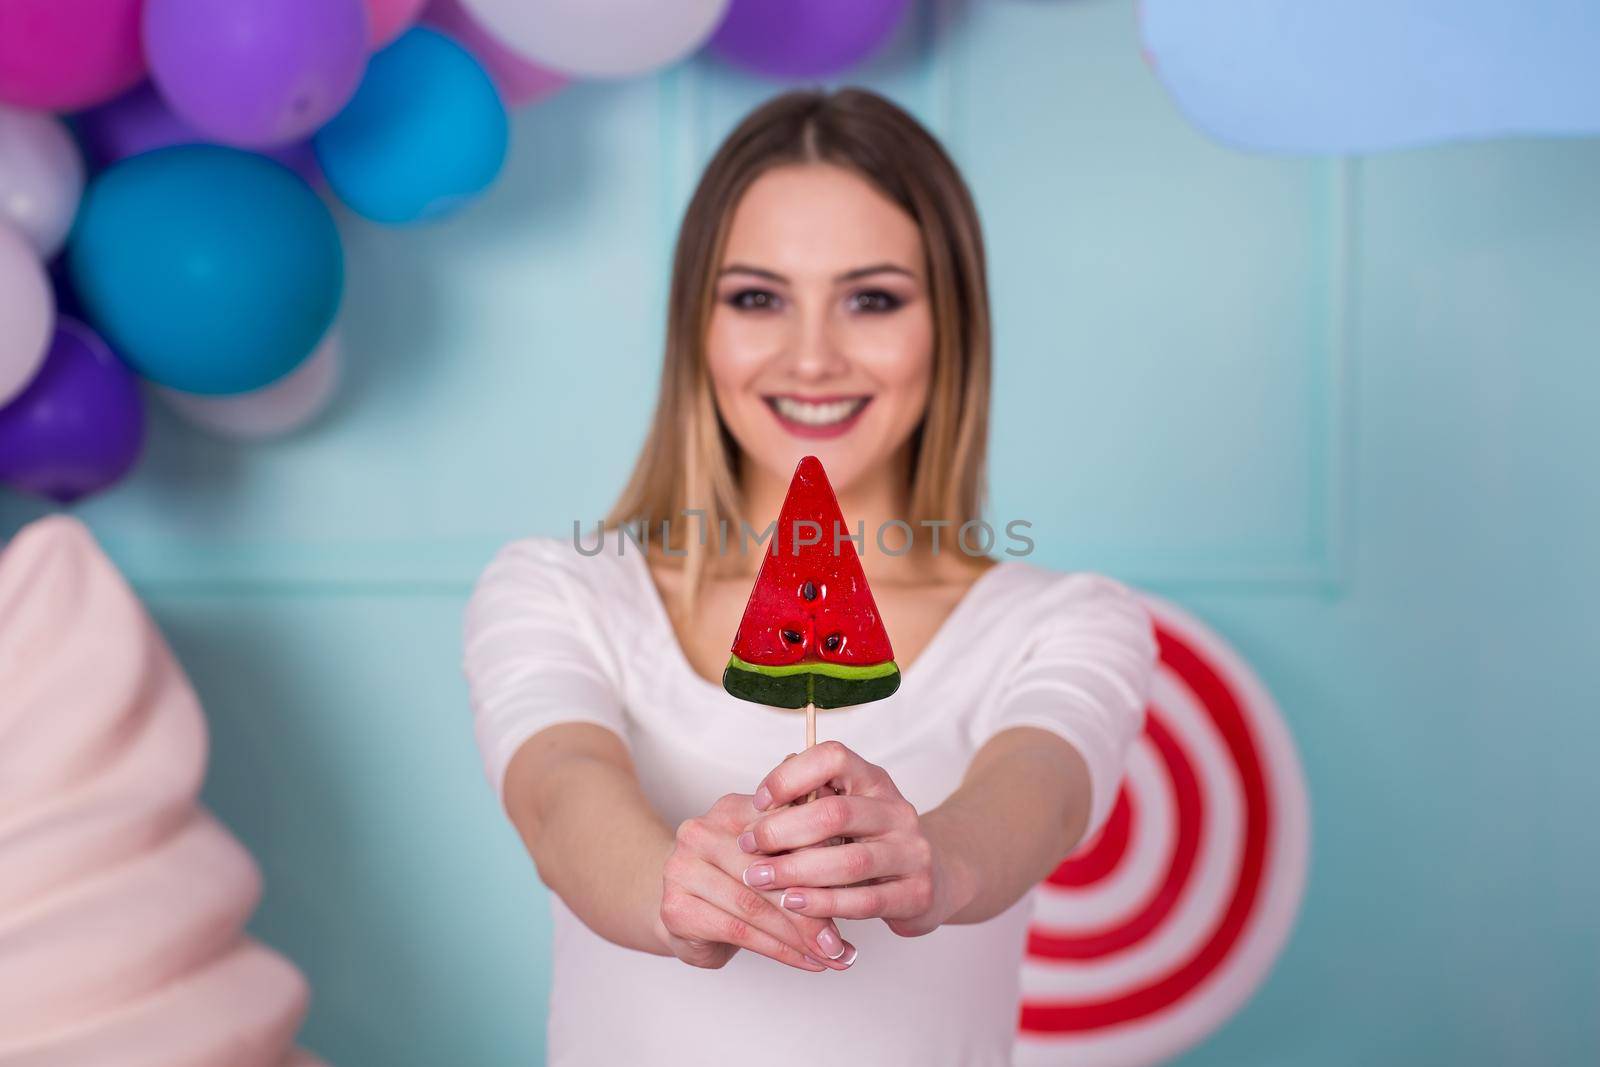 Portrait of amazing sweet-tooth woman in pink dress holding candies and posing on background decorated with huge ice cream. Lollipop watermelon. by StudioPeace